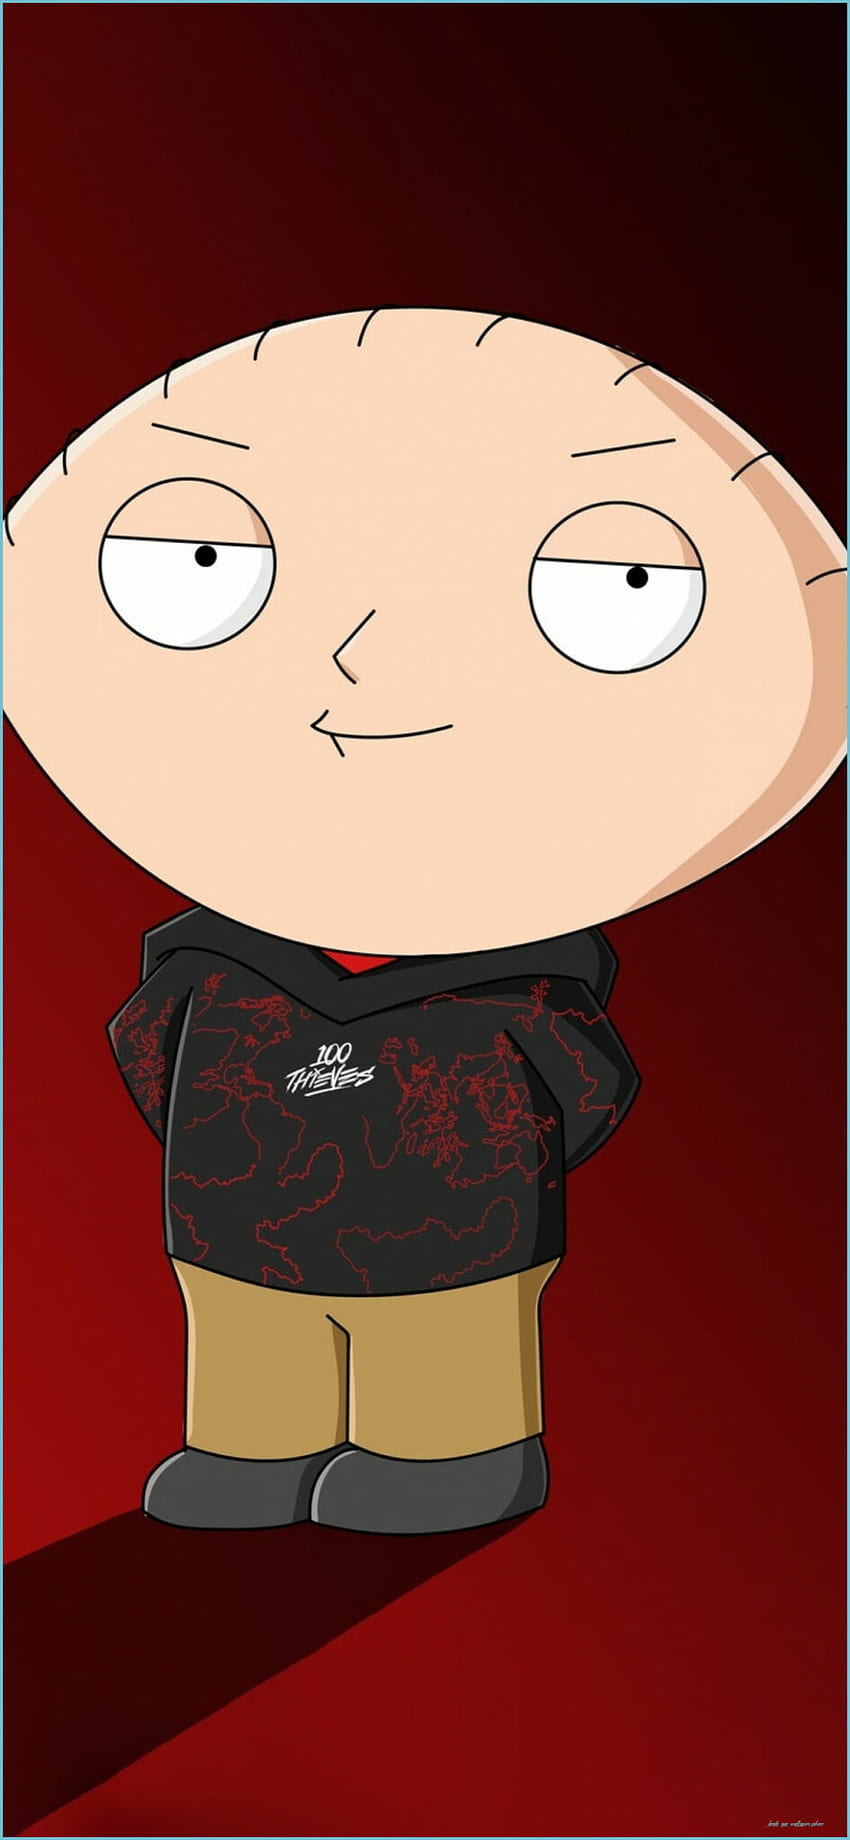 DJ Stewie Griffin from Family Guy wallpaper  Cartoon wallpapers 